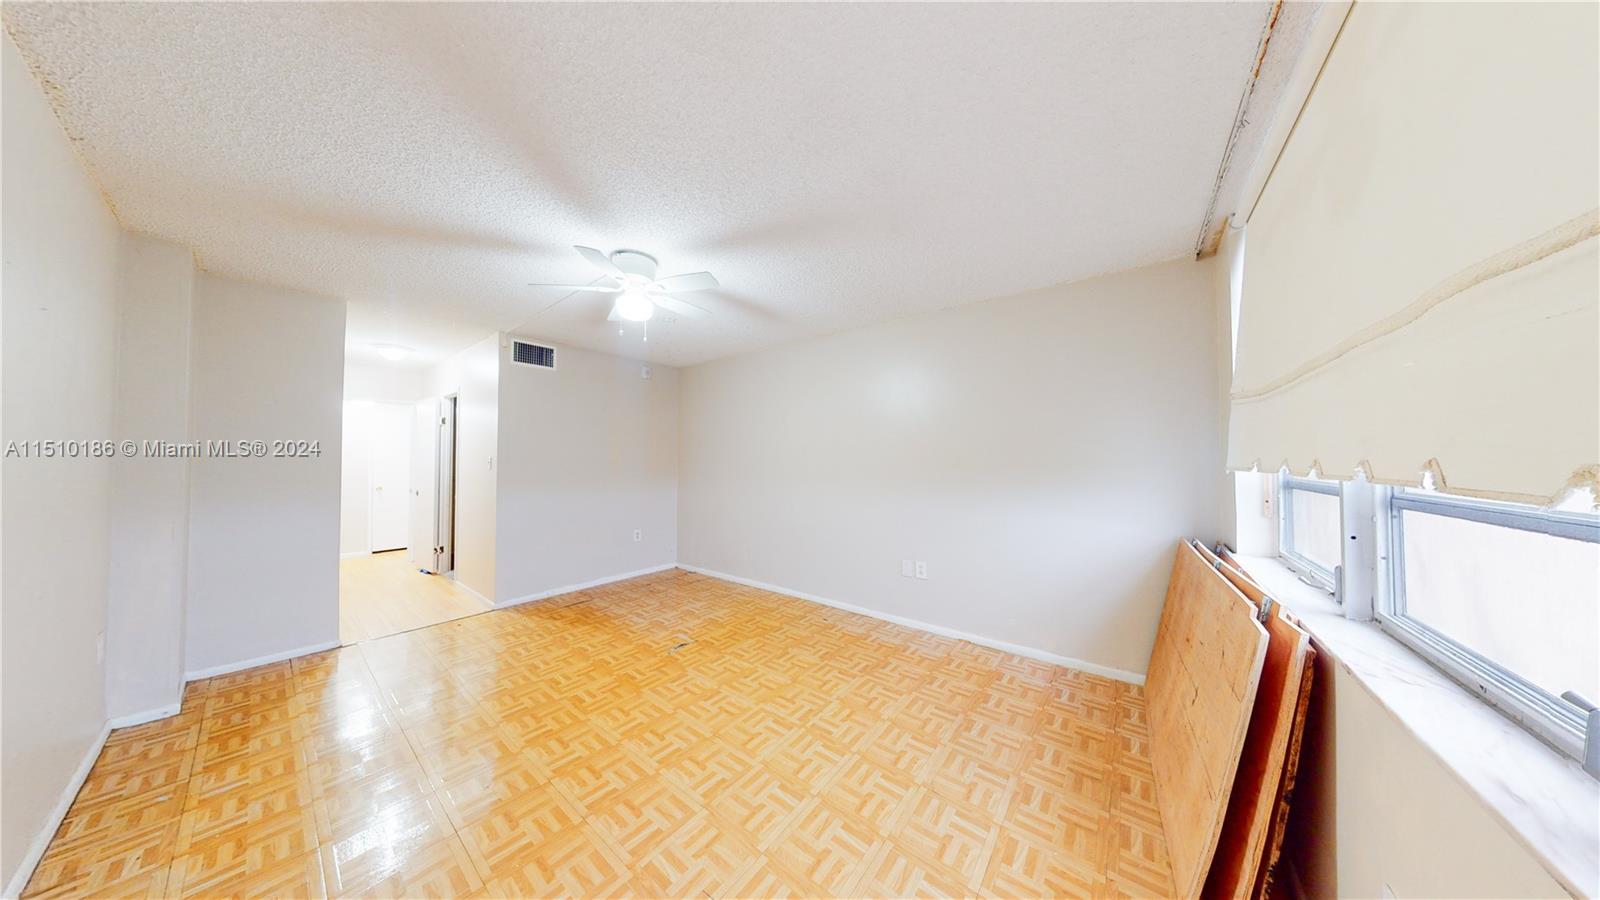 1780 NE 191st St 606-2, Miami, Florida 33179, 1 Bedroom Bedrooms, ,1 BathroomBathrooms,Residential,For Sale,1780 NE 191st St 606-2,A11510186